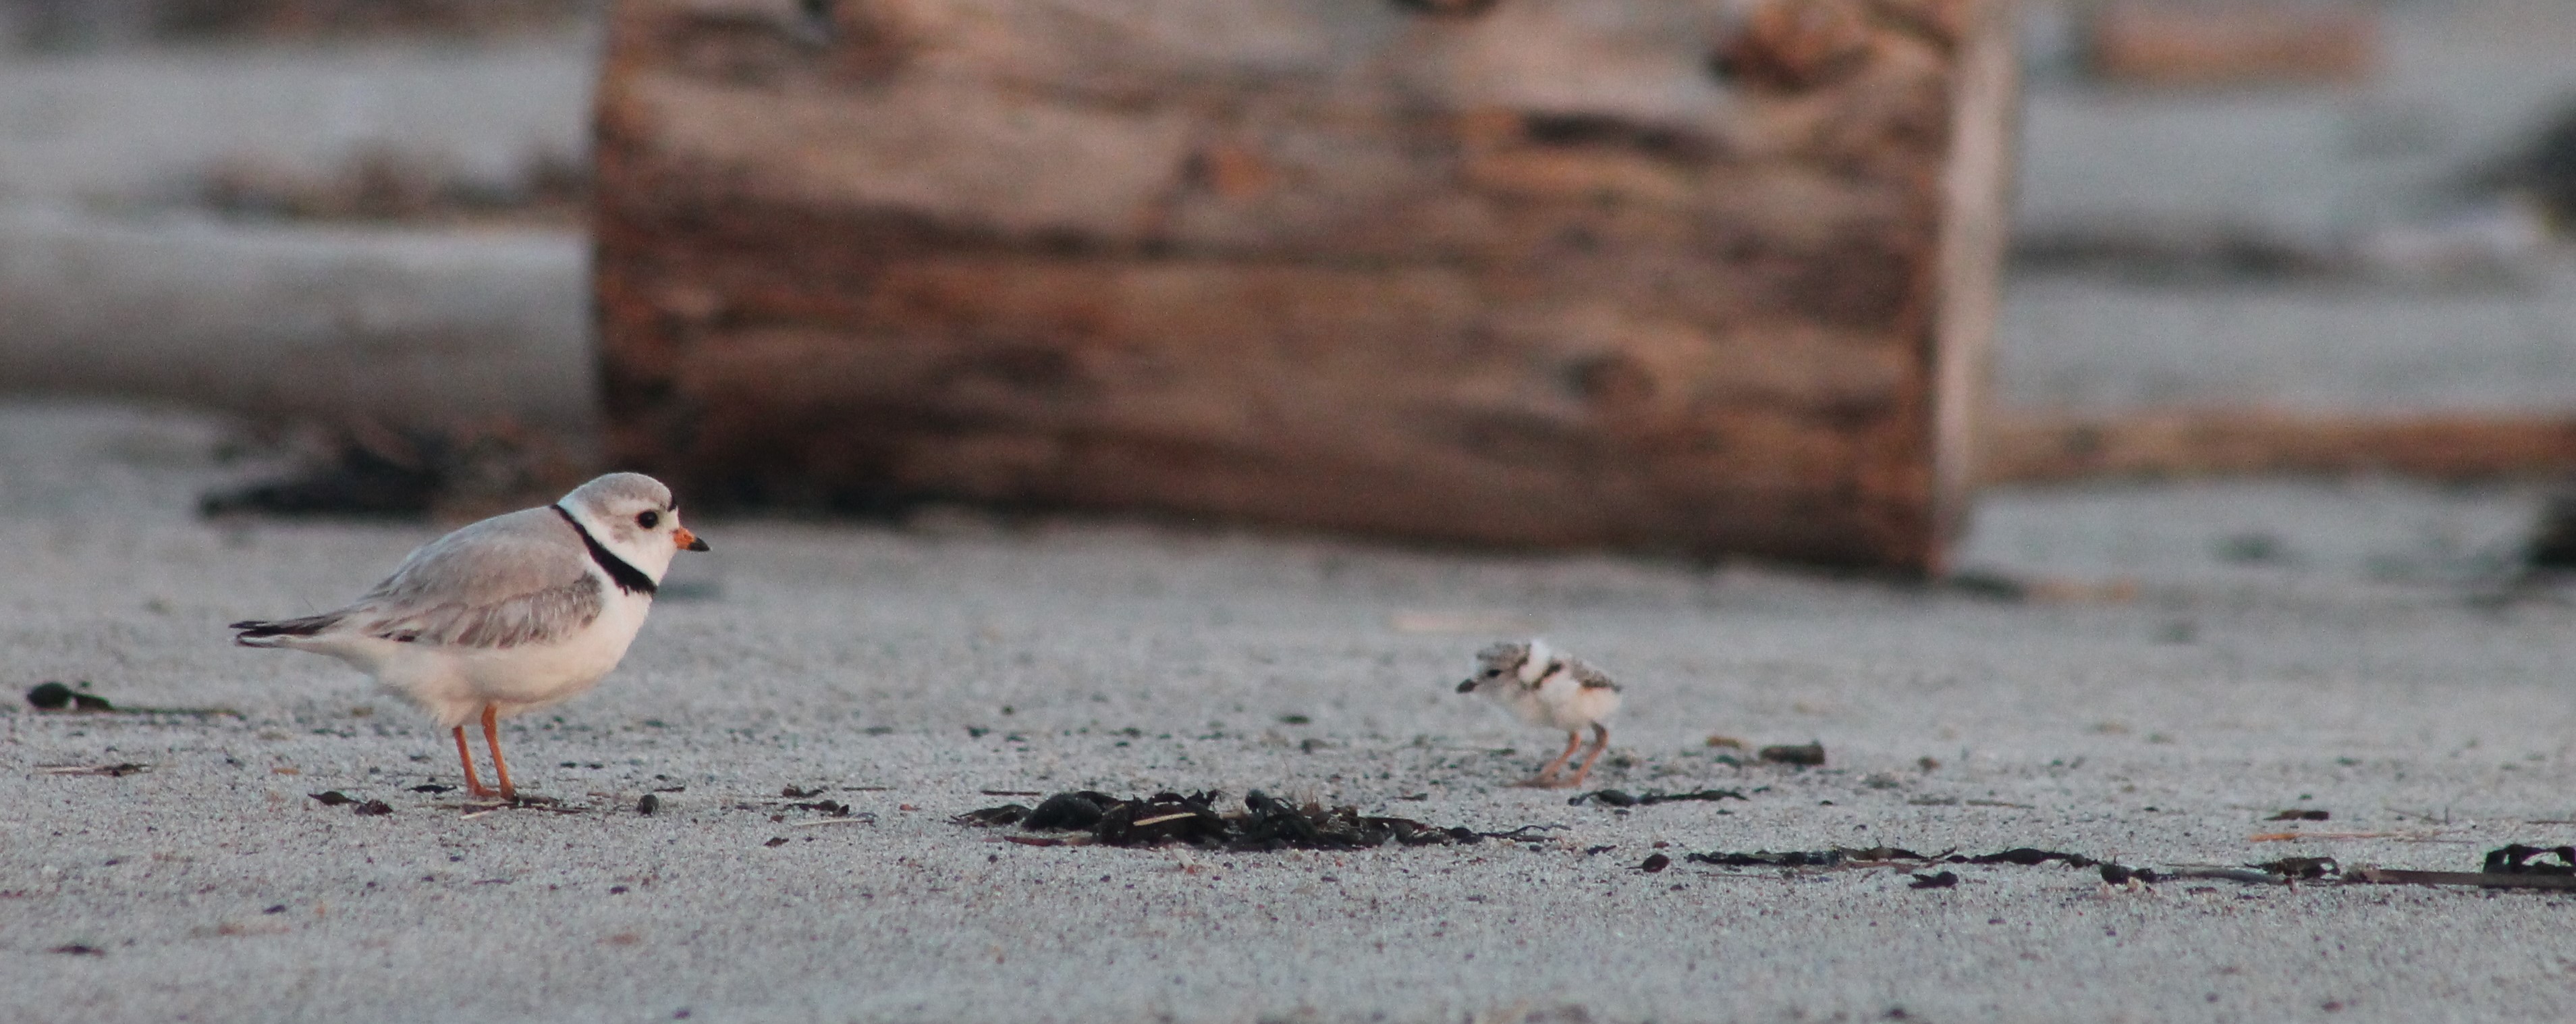 Piping plover adult and chick on beach at Rachel Carson National Wildlife Refuge